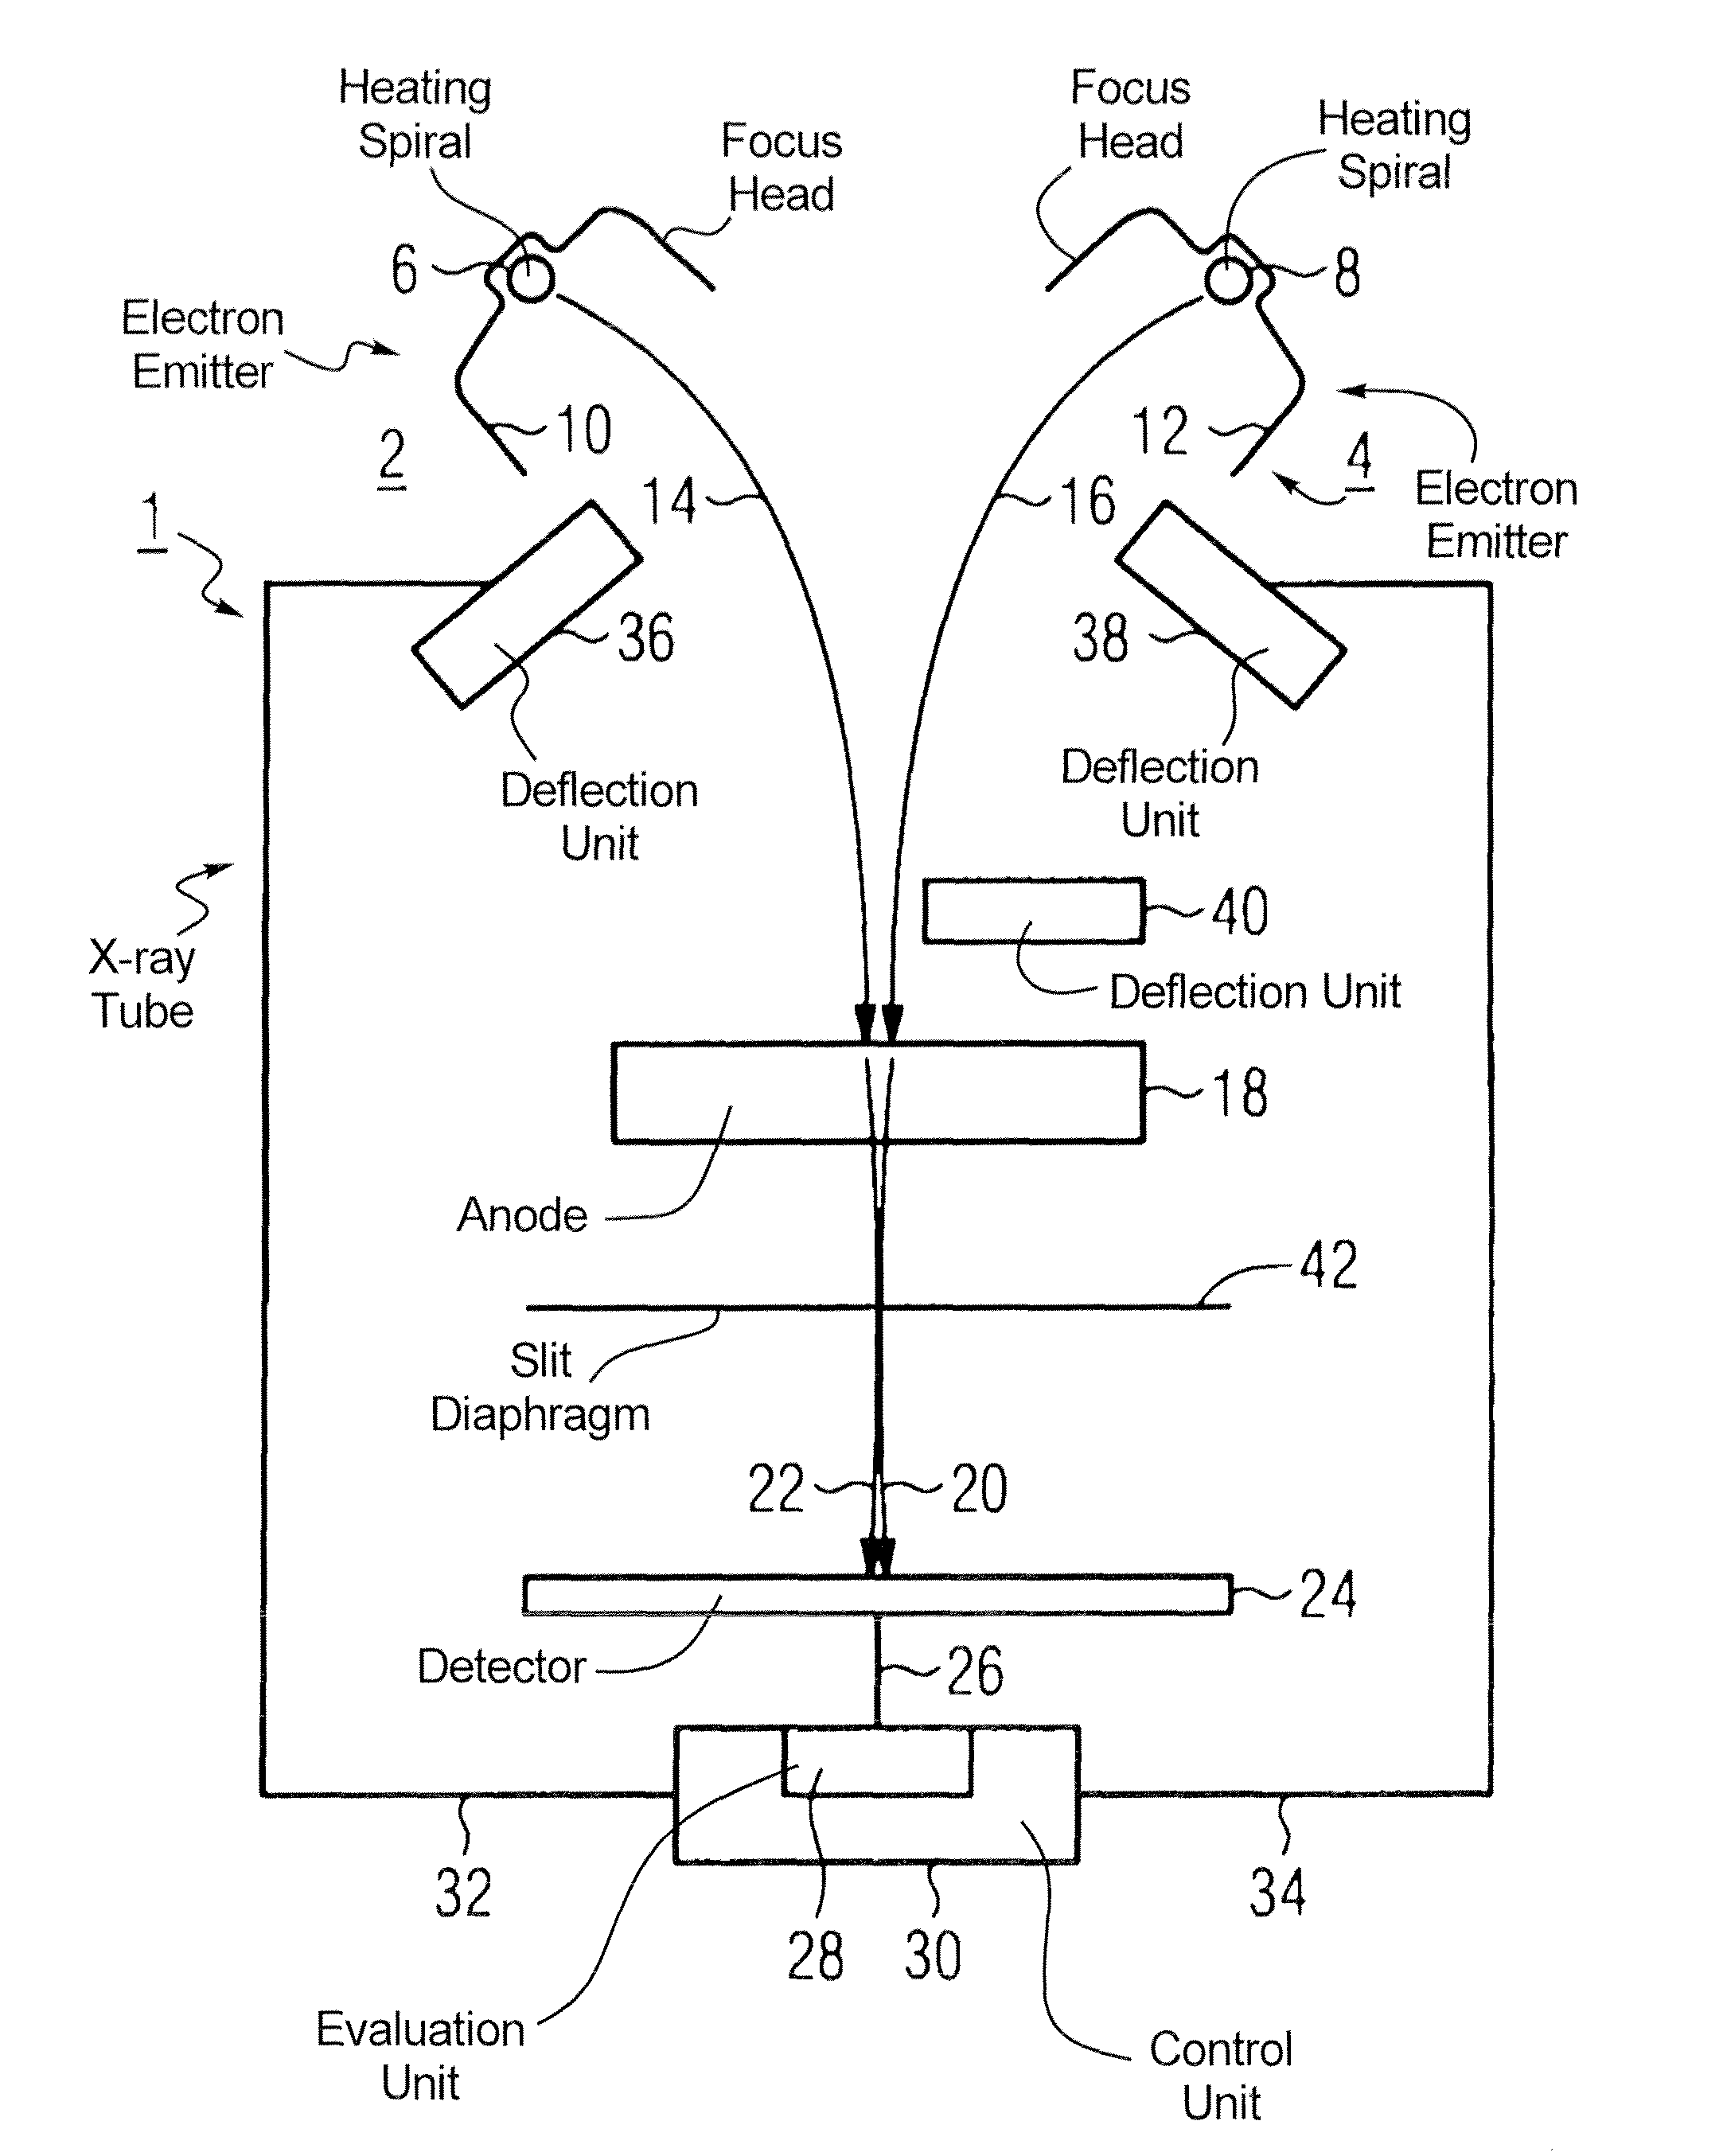 Electron beam controller of an x-ray radiator with two or more electron beams